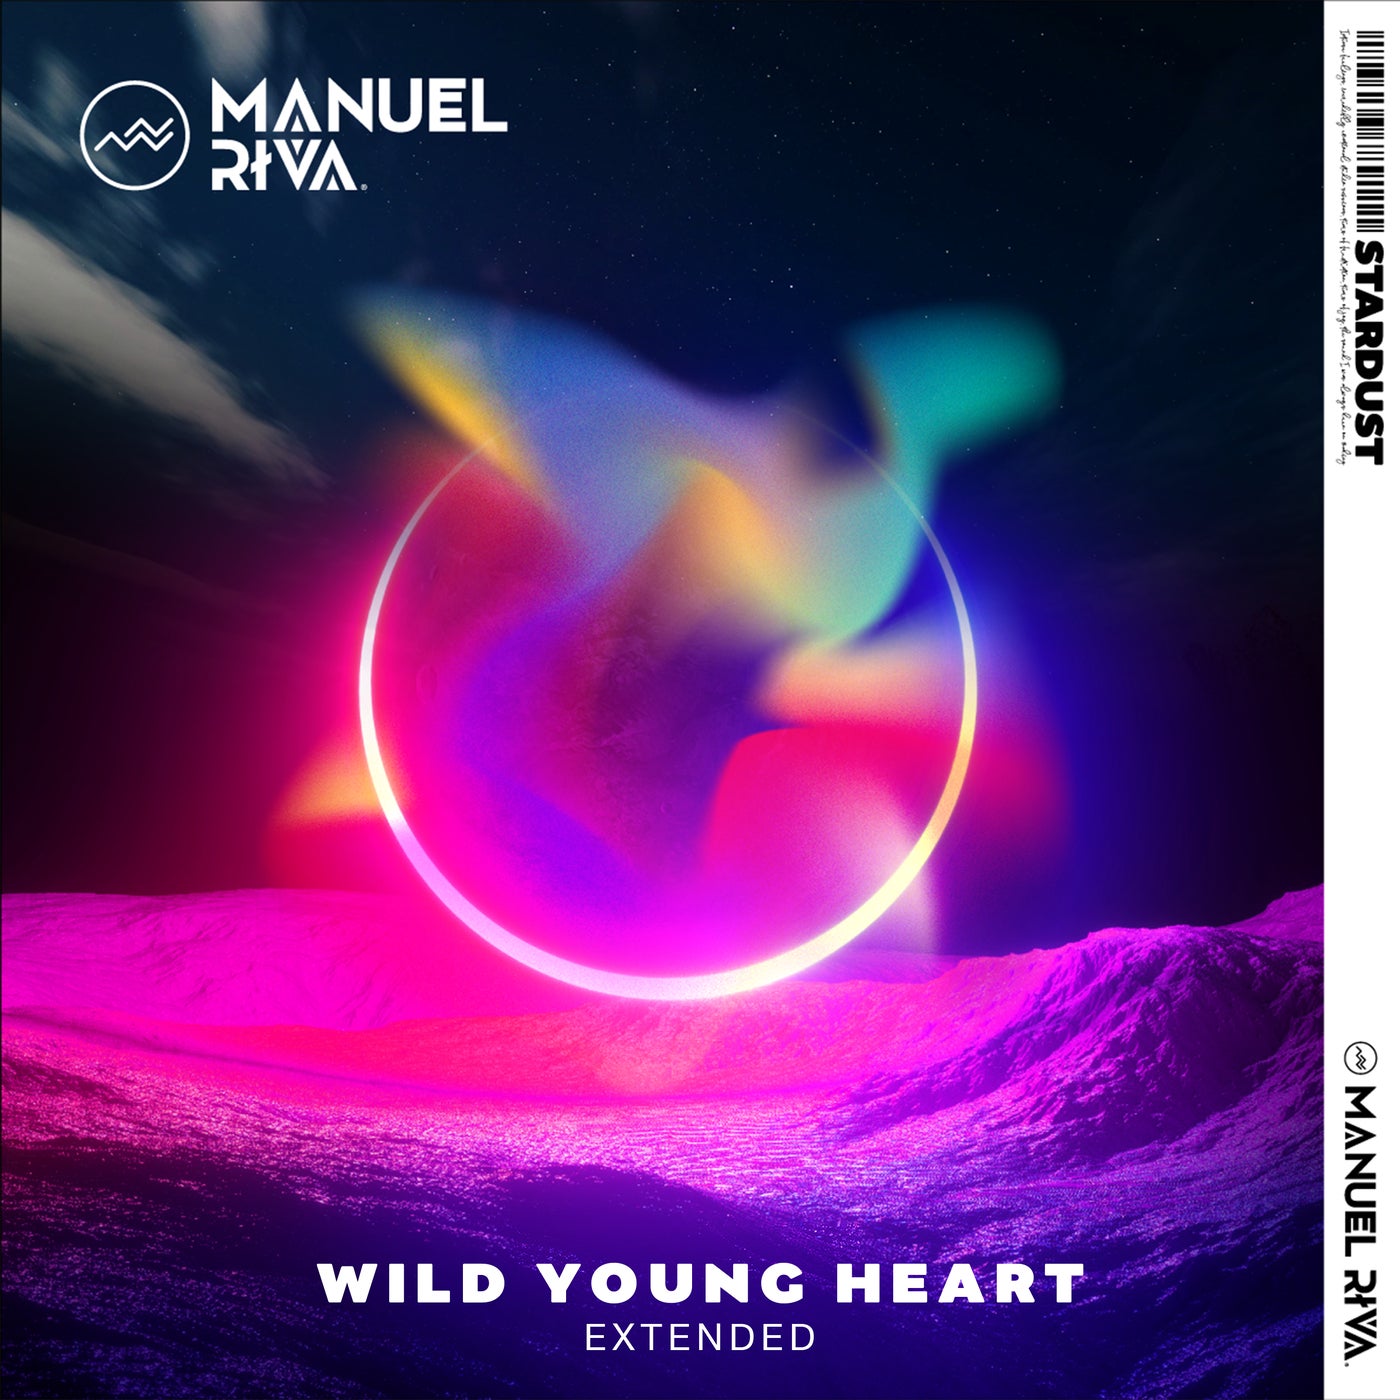 Manuel Riva - Wild Young Heart feat. Misha Miller (Extended)